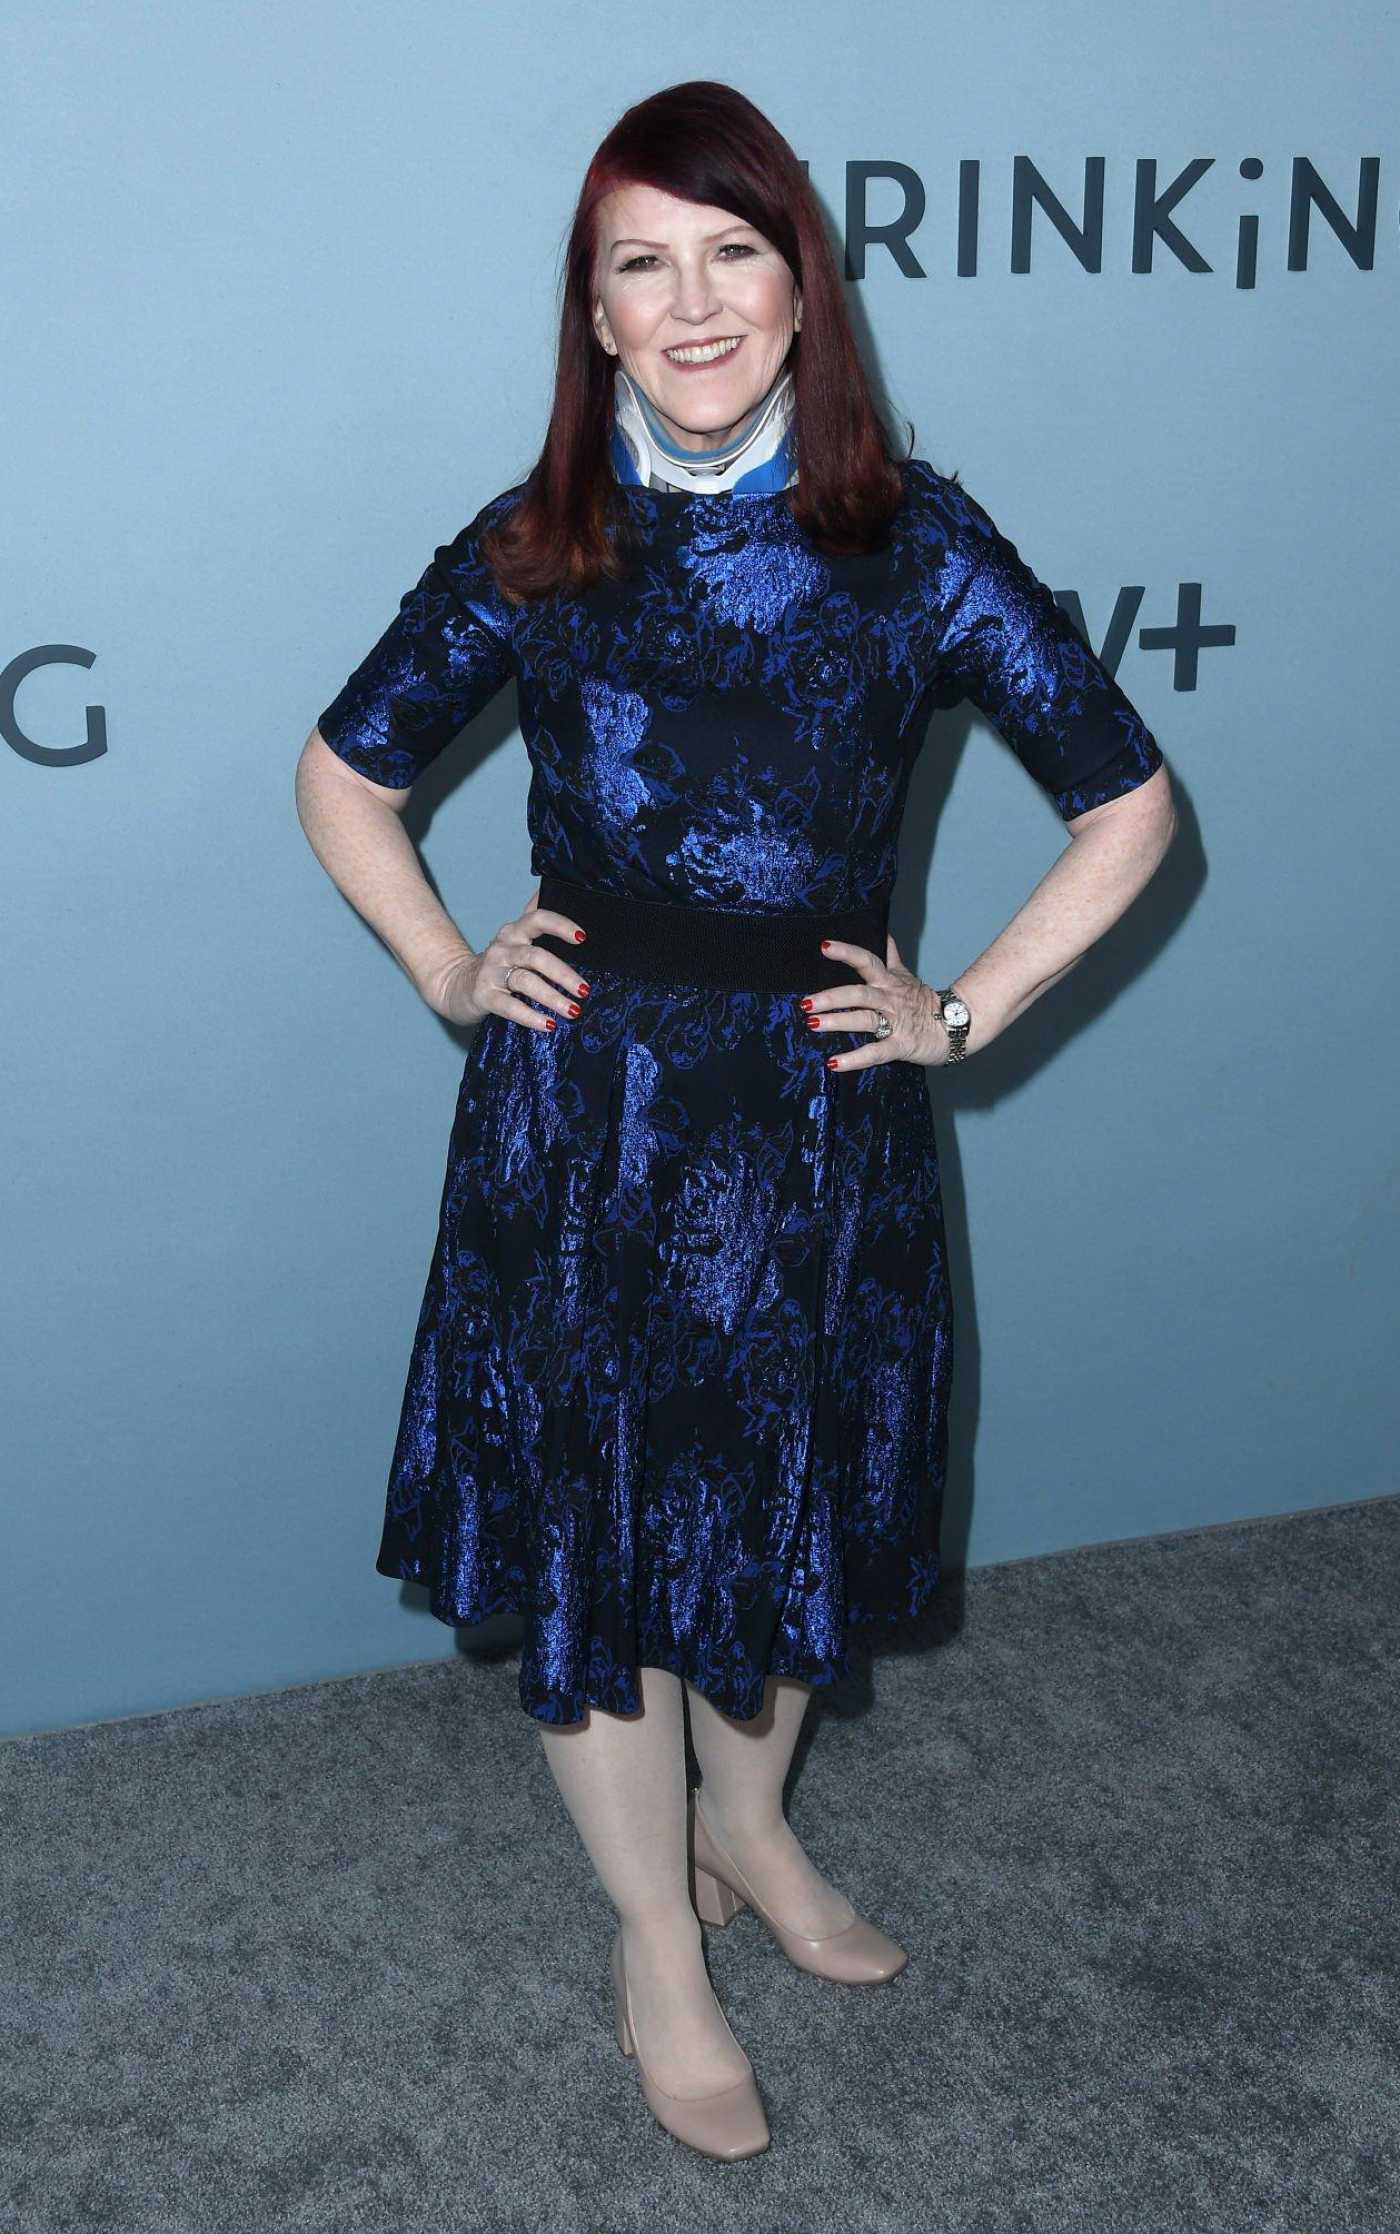 Kate Flannery Attends Shrinking Premiere at Directors Guild of America in Los Angeles 01/26/2023